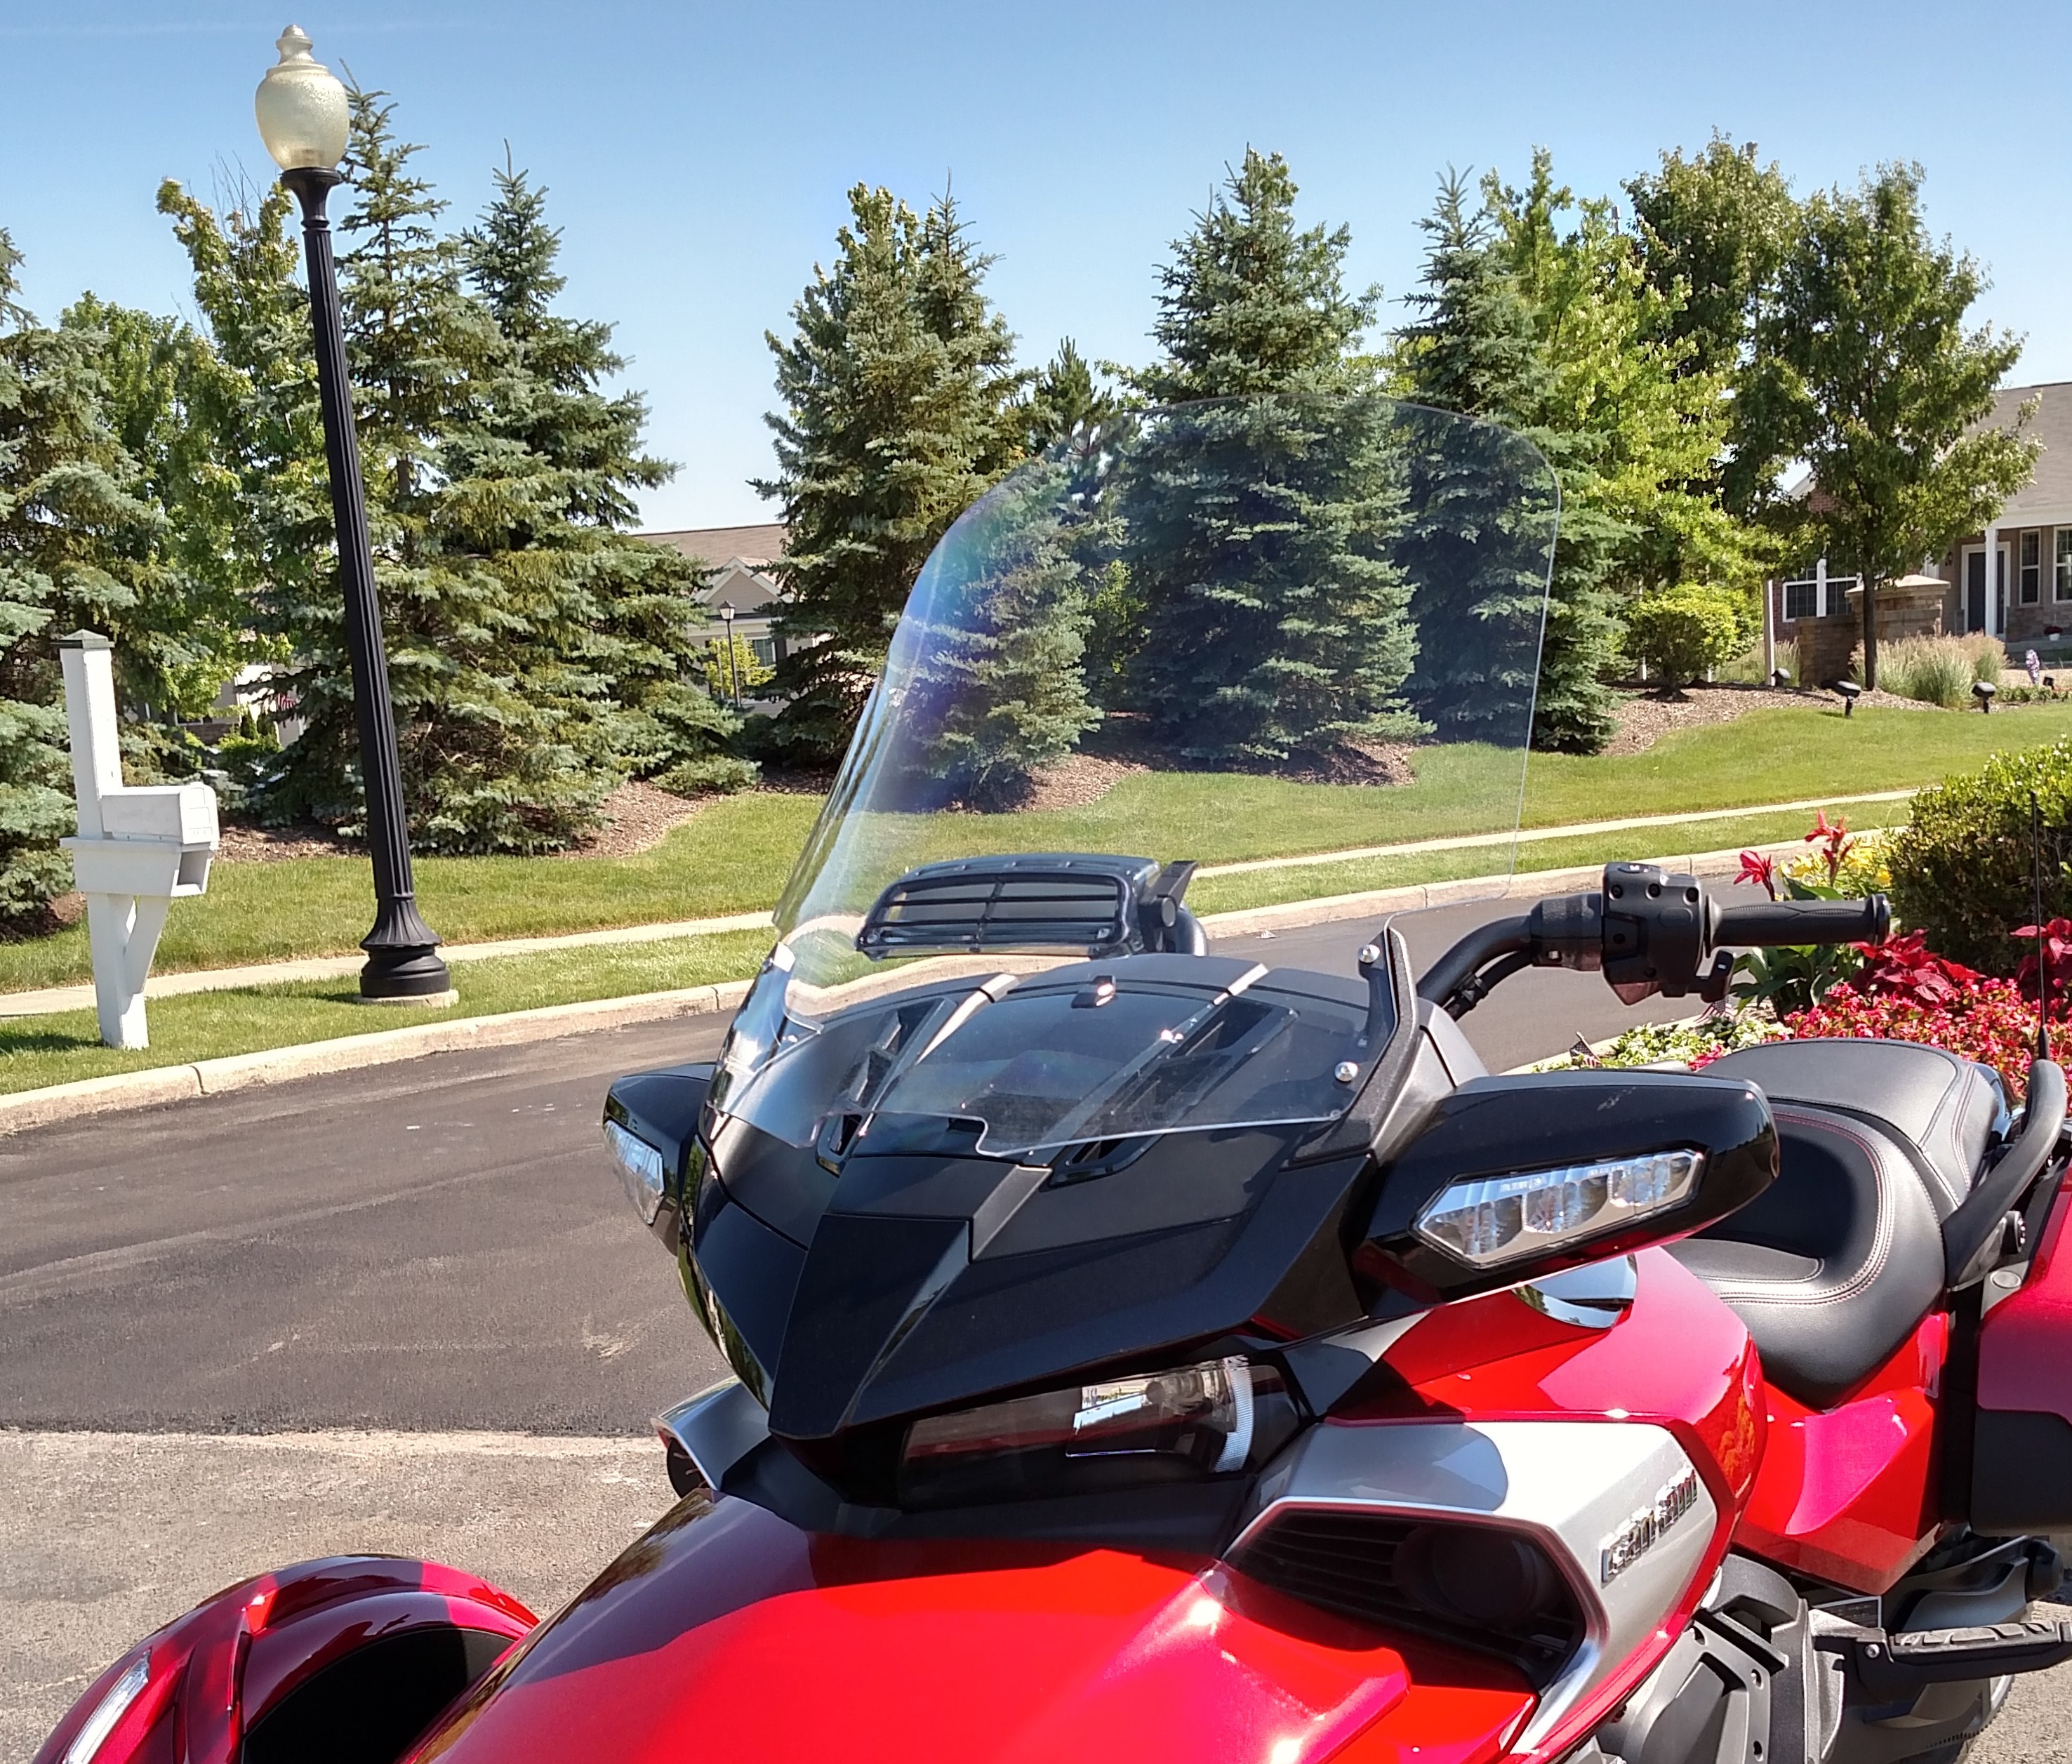 Windshield for Spyder F3-Touring or Limited Motorcycles